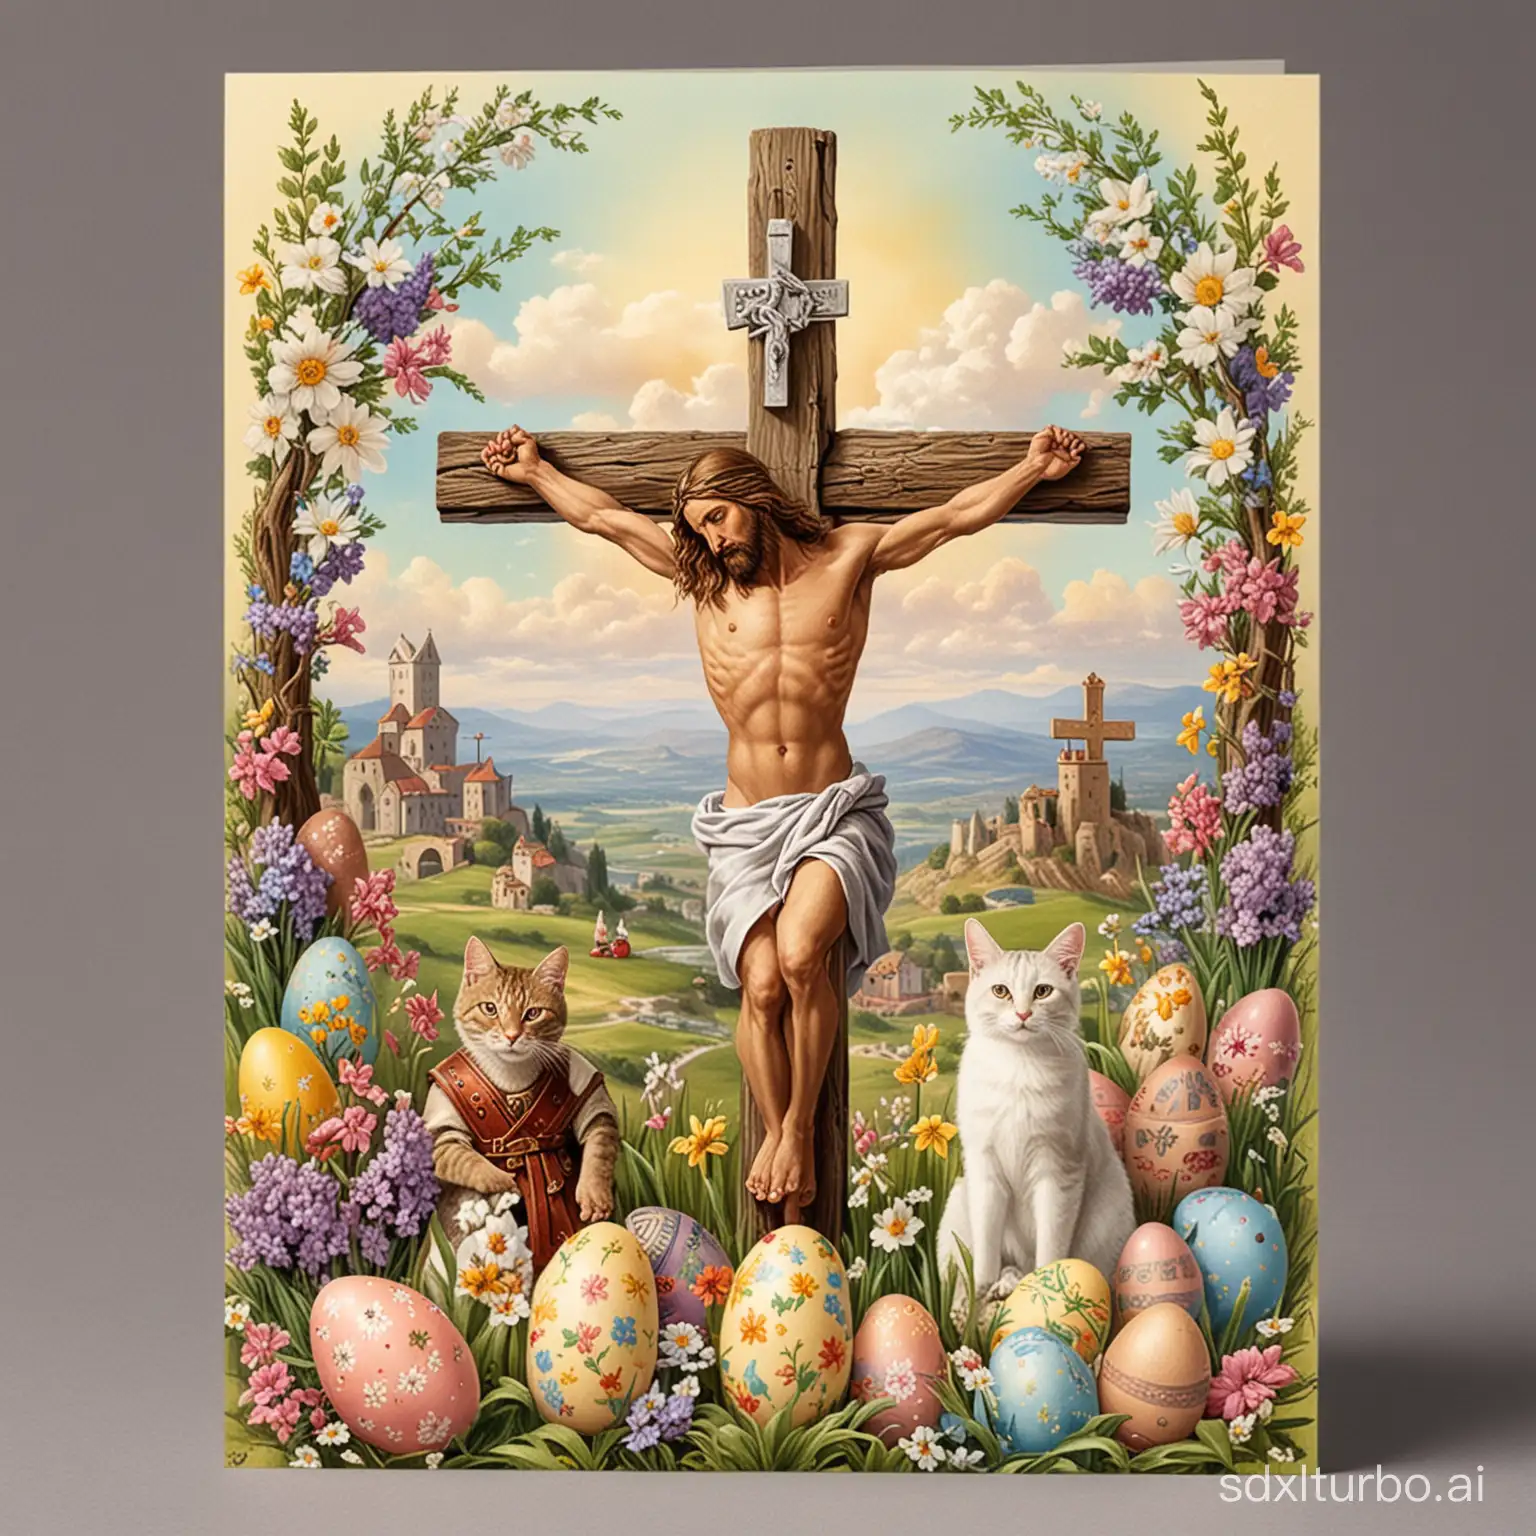 Easter greating card featuring: jesus on cross, roman soldiers, easter bunny, cat, flowers, golgota hill, easter eggs